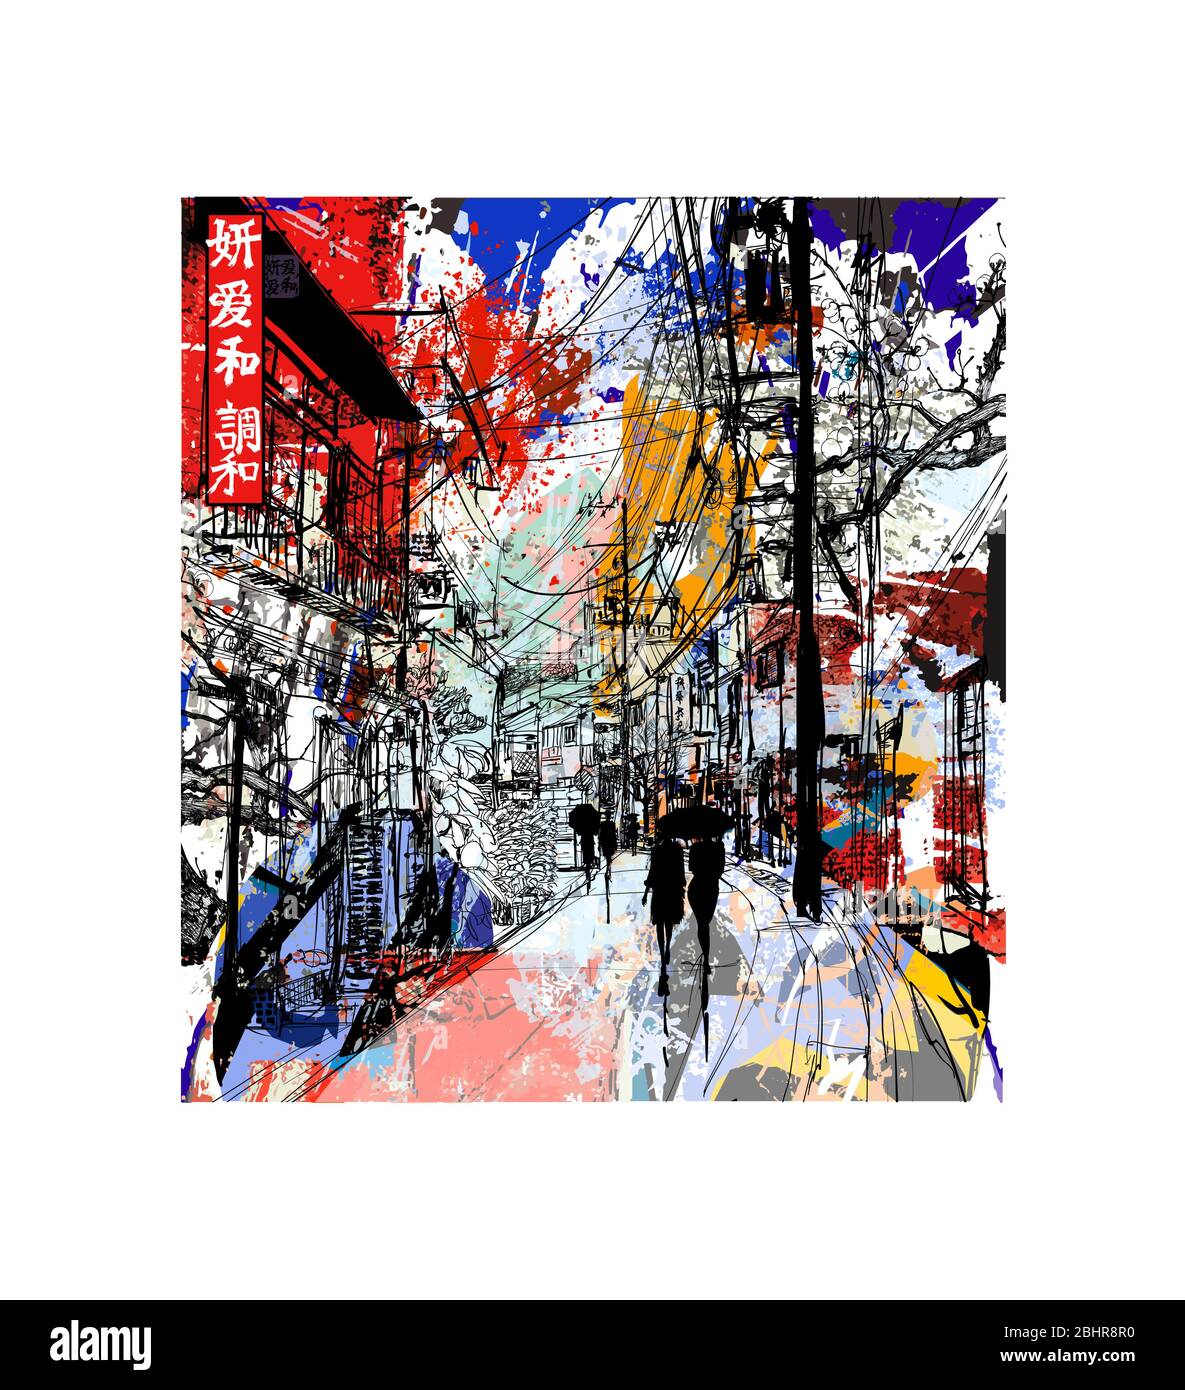 Pedestrians in a street of Tokyo - vector illustration Japanese characters meaning: Beauty Love Peace Harmony Japan same characters in the stamp  Idea Stock Vector